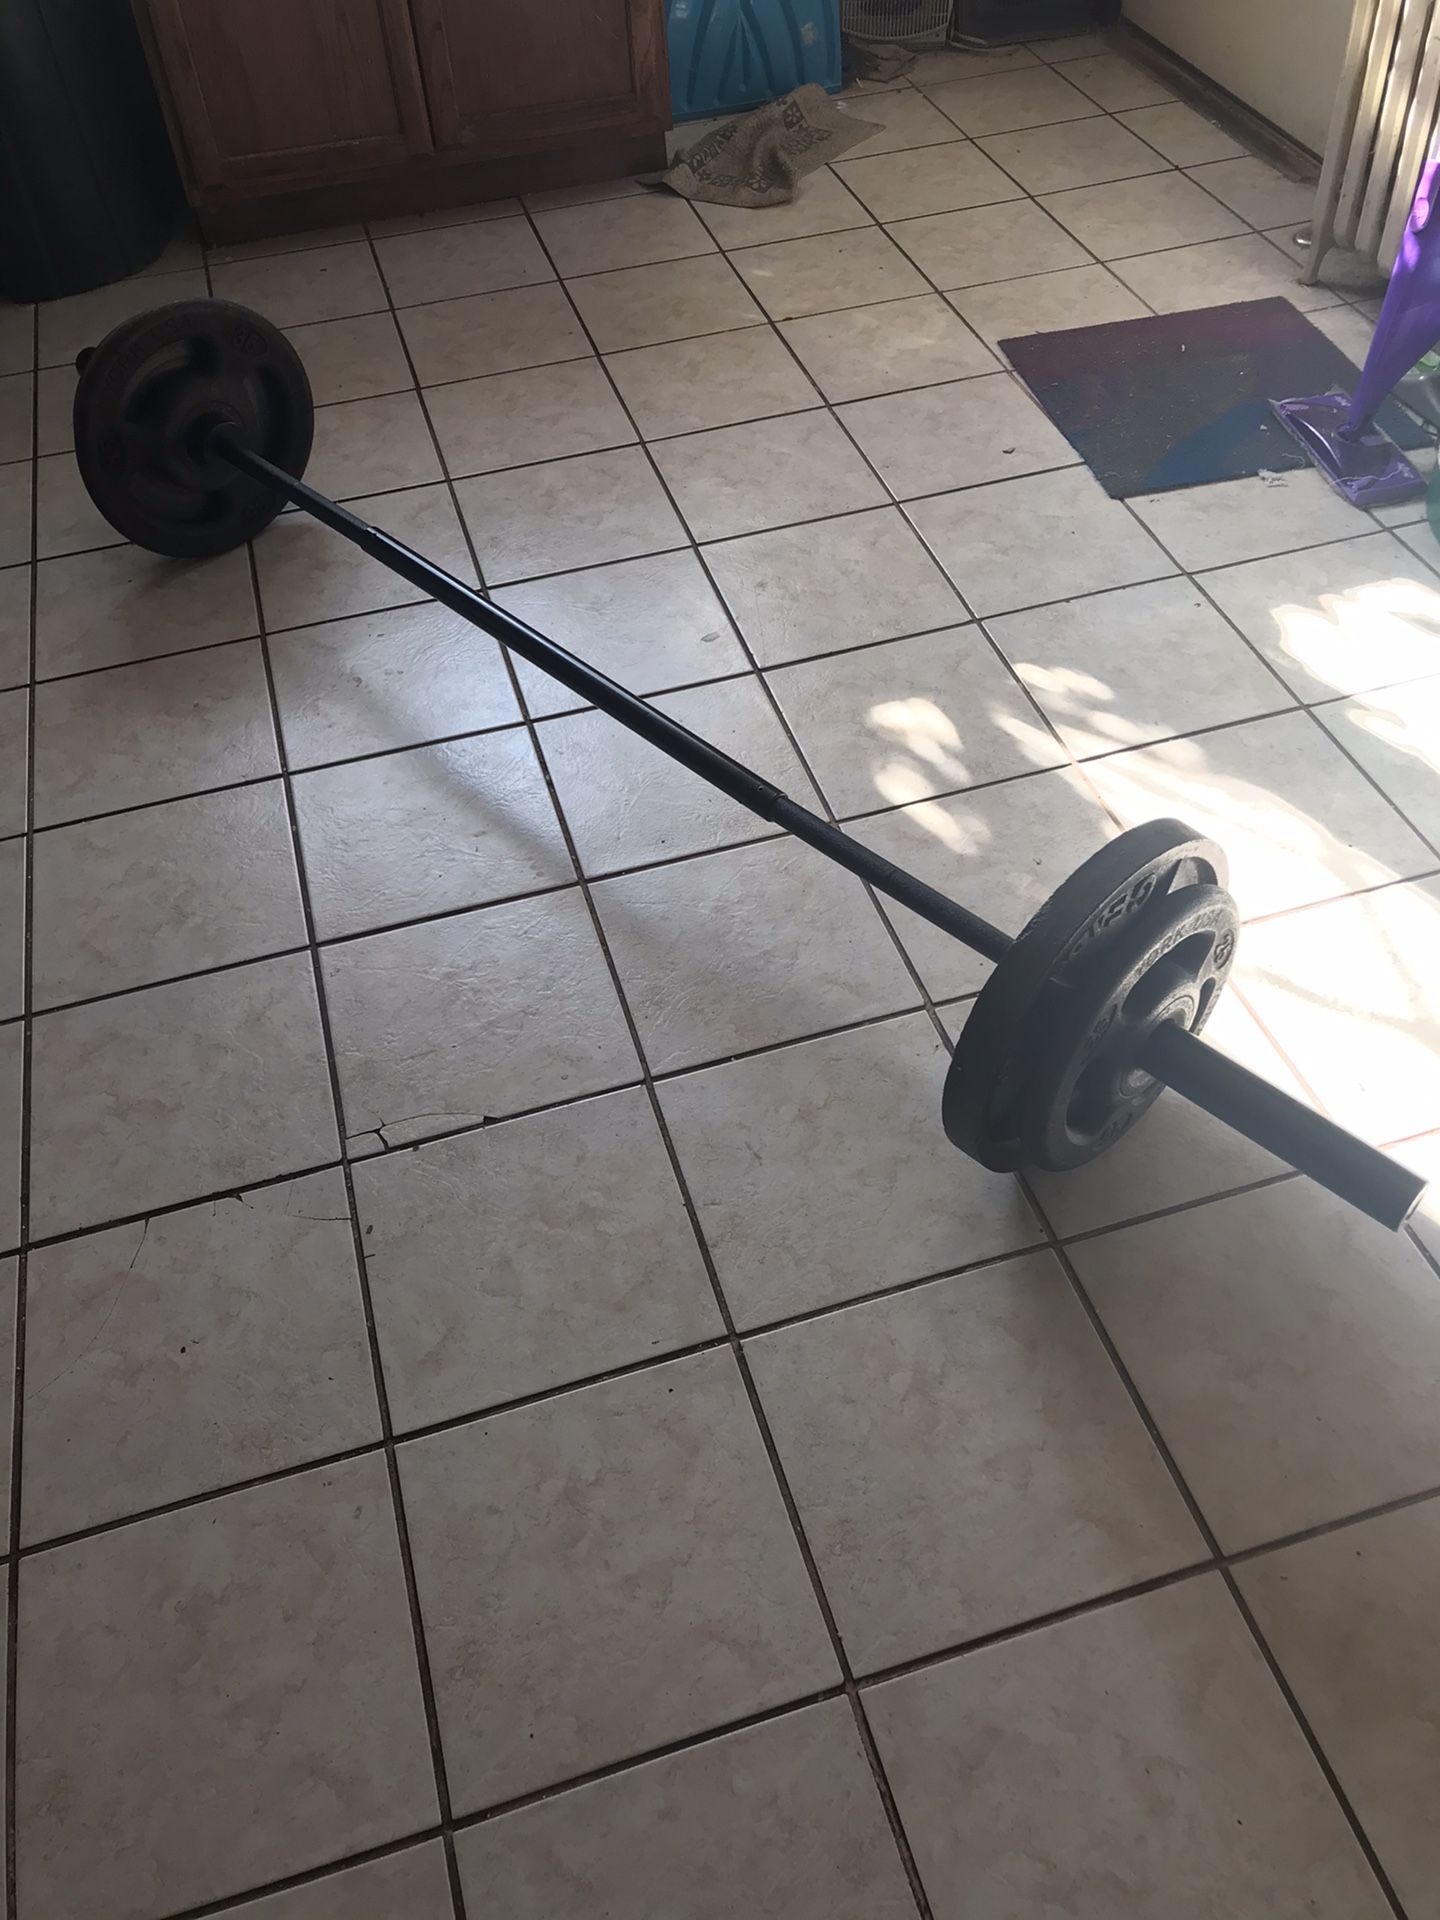 150 lb Olympic weight set